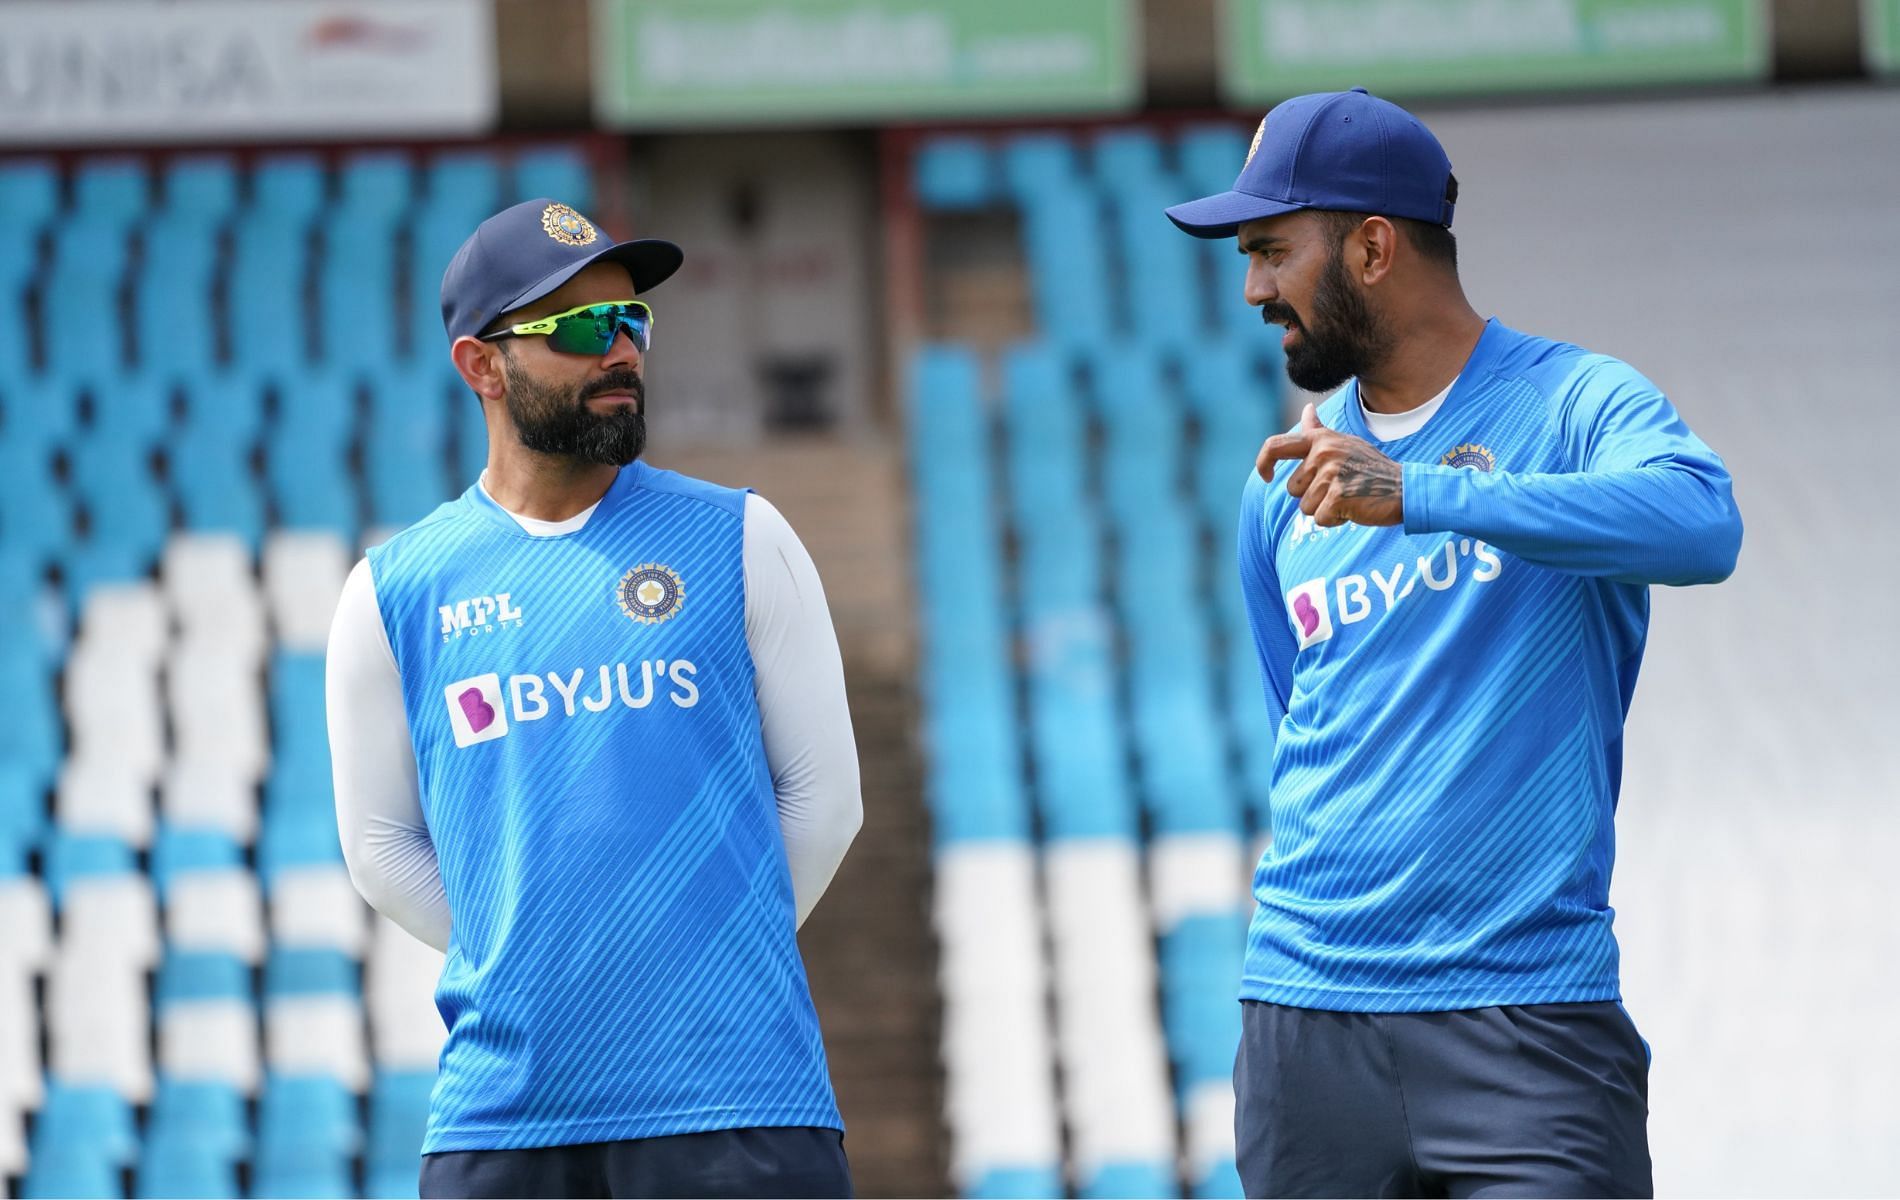 “We Are Slightly Better Prepared Compared To 2018” – KL Rahul Ahead Of First Test vs South Africa